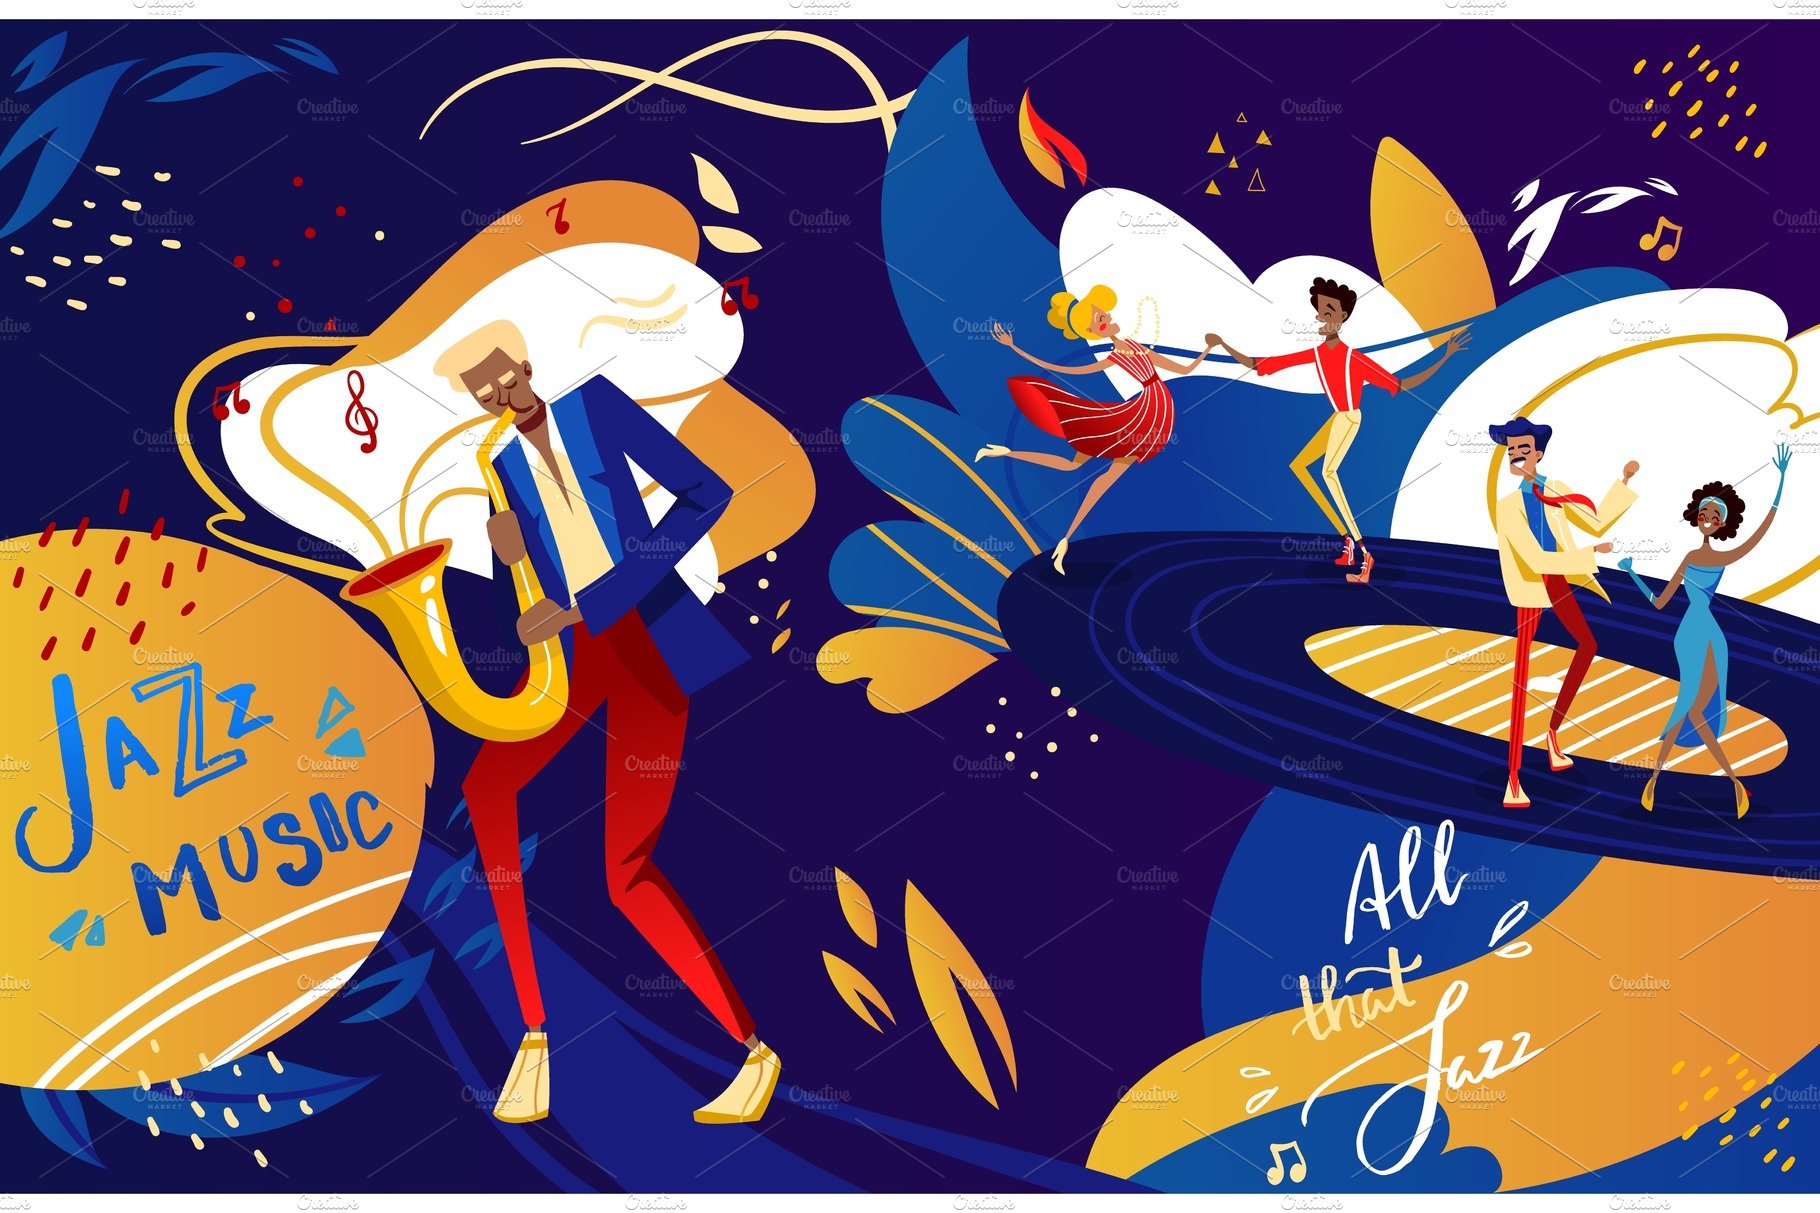 Jazz festival dance party vector cover image.